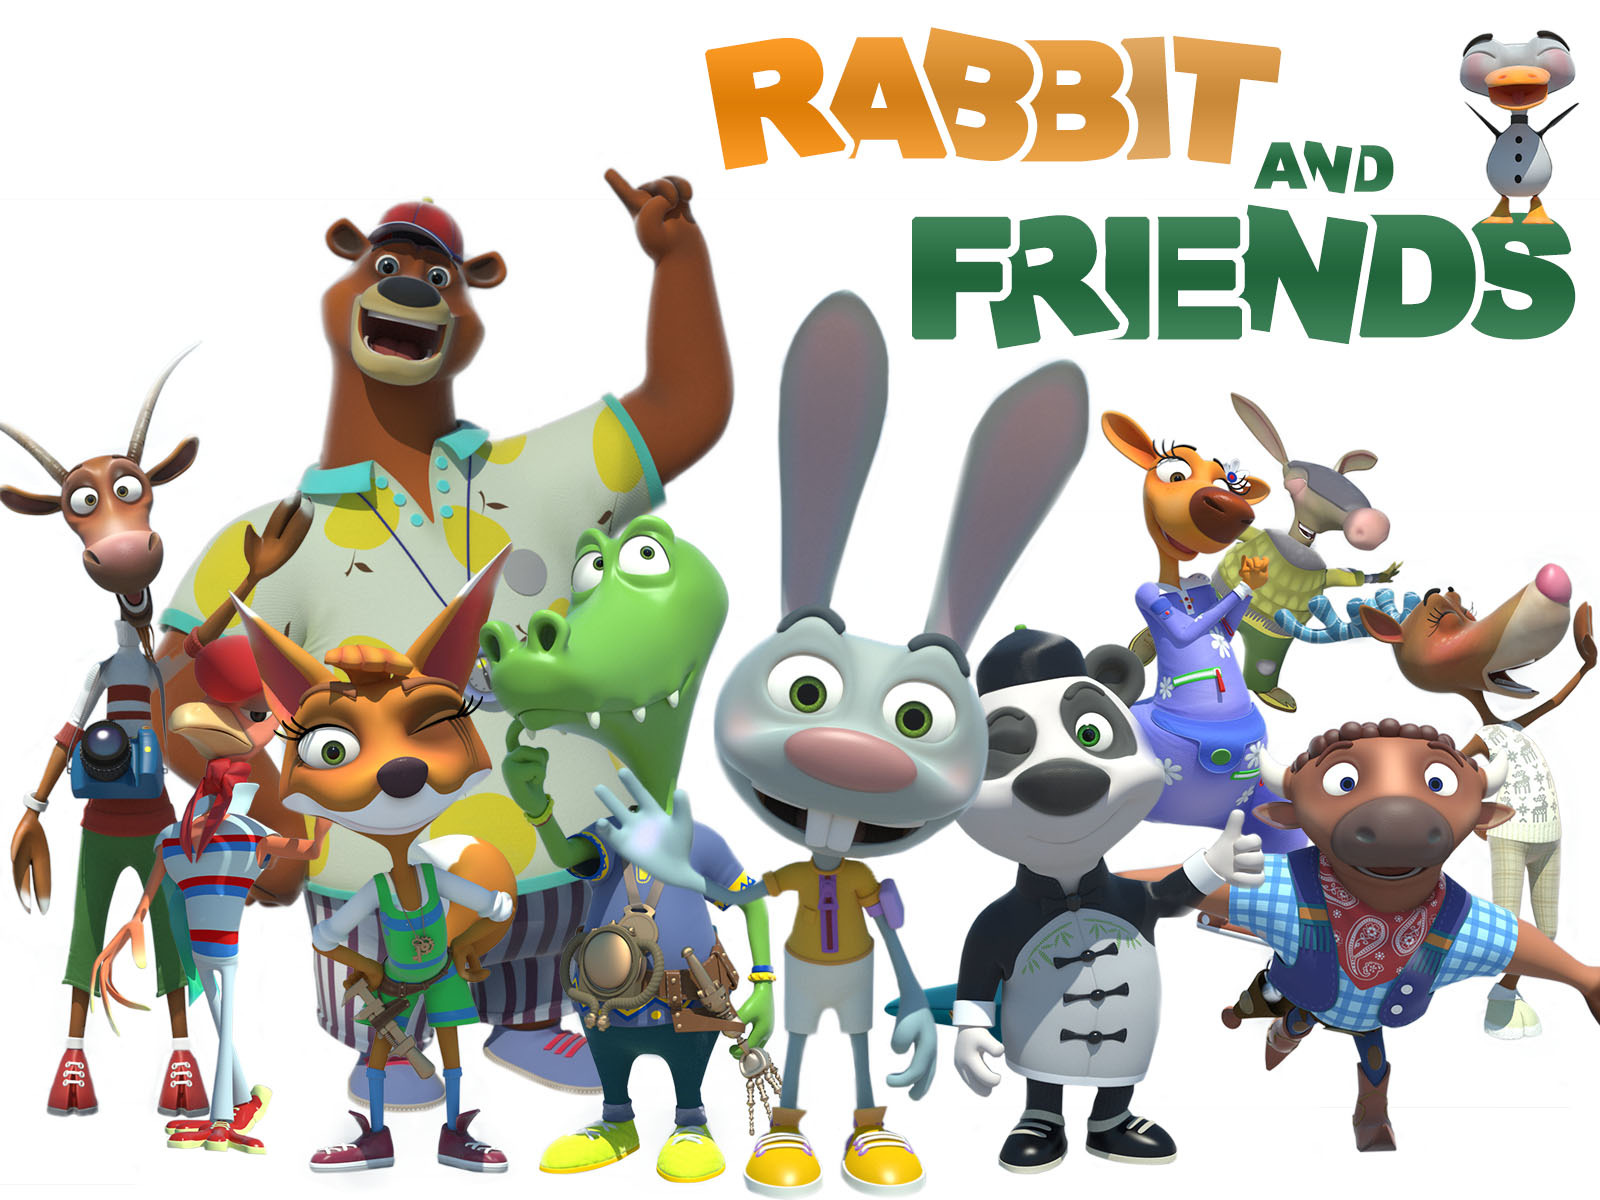 Rabbit and friends